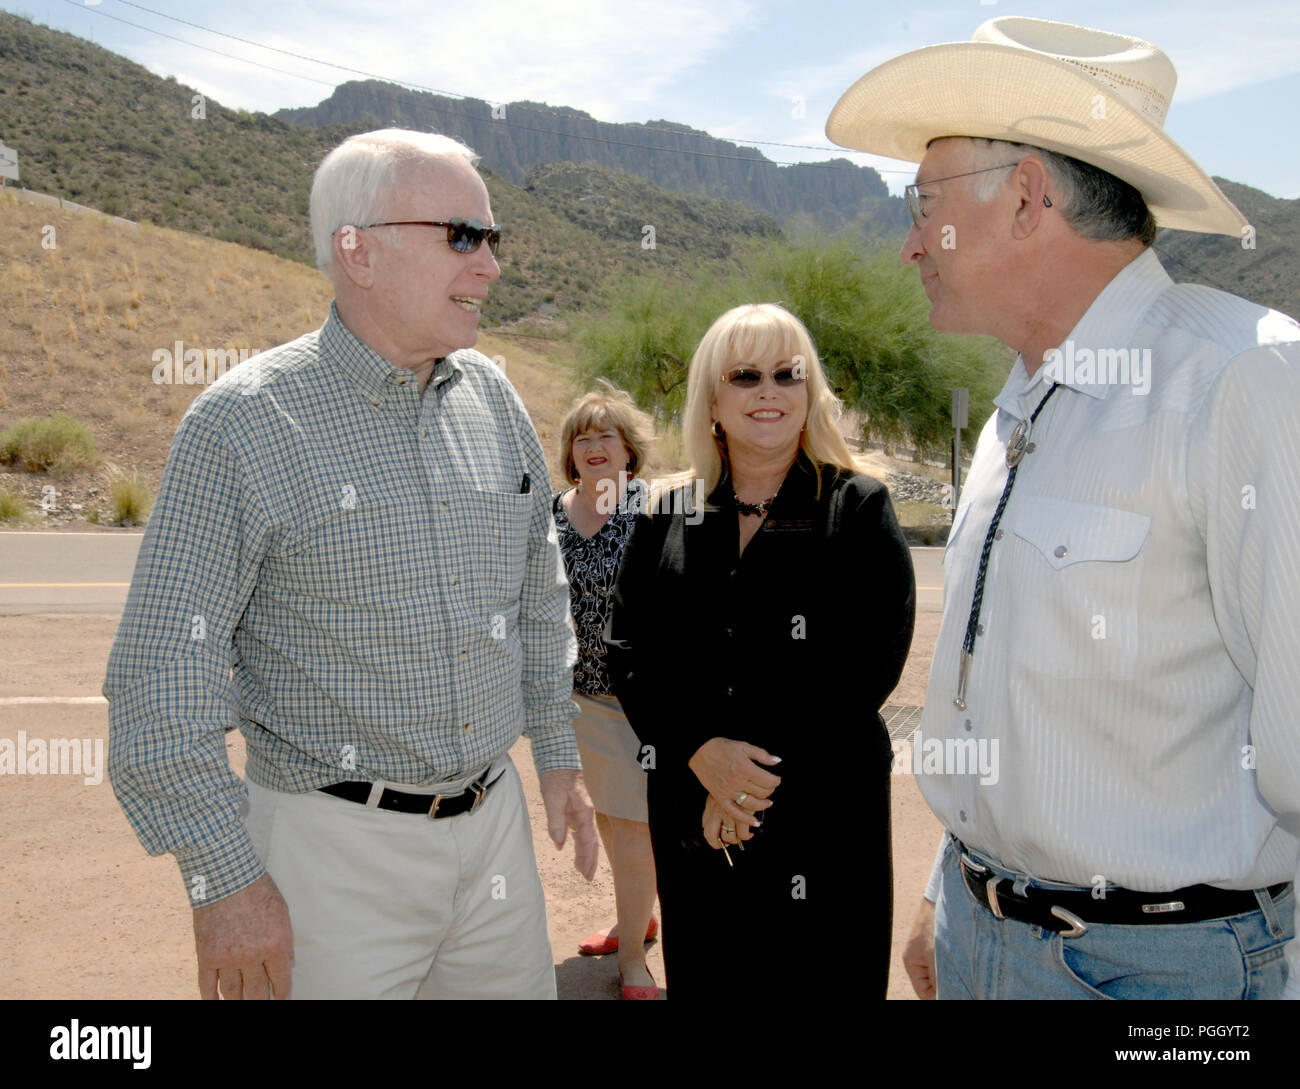 Secretary Ken Salazar on visit to southeastern Arizona, [joining Arizona Senator John McCain and other officials for] copper mine tour and press conference [on controversy surrounding Resolution Copper Company plans for mining operation in Oak Flat area] - 8/21/2009 Stock Photo